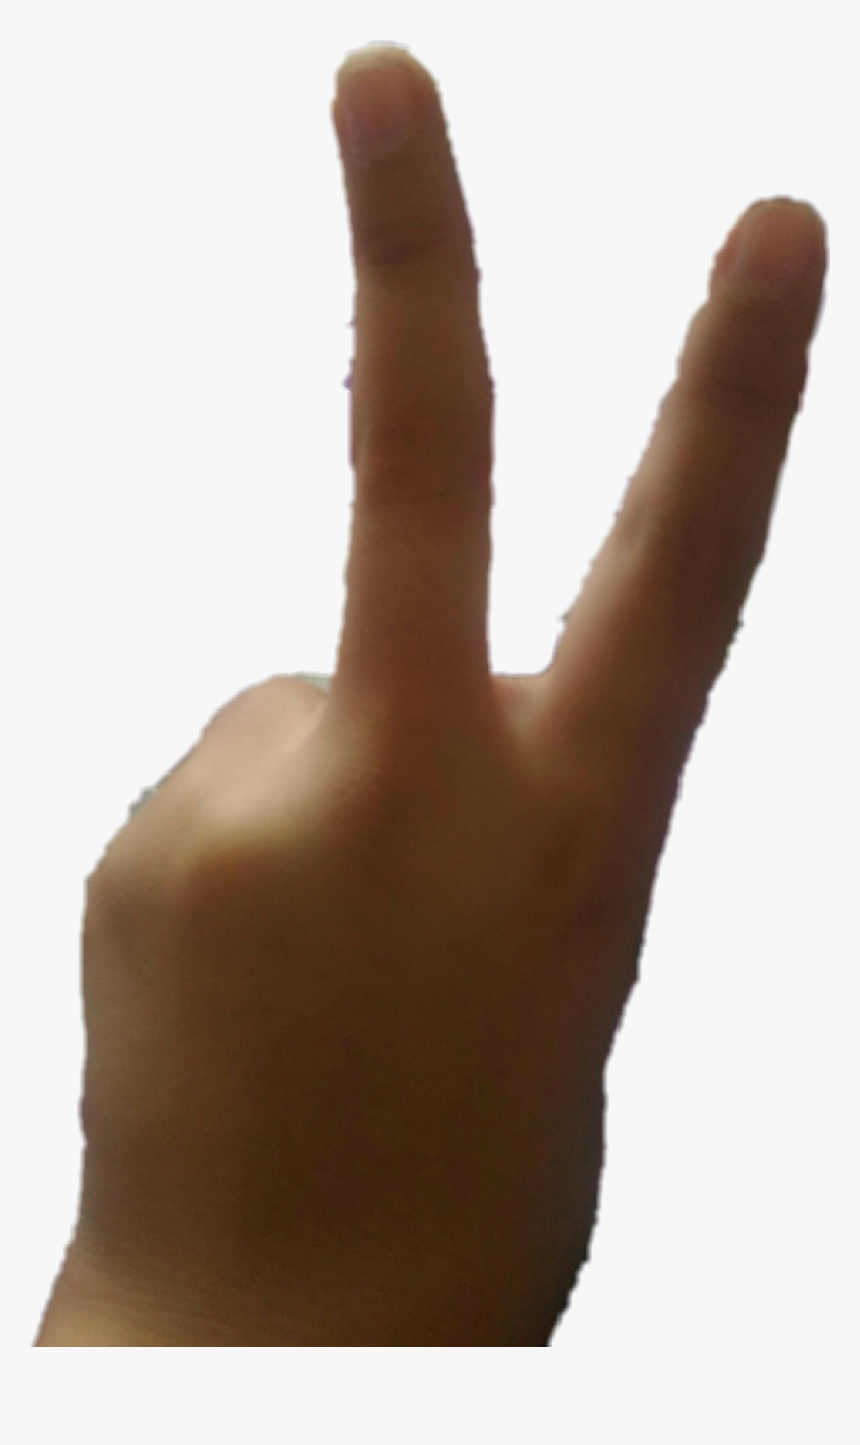 #hand #fingers #peace - Sign Language, HD Png Download, Free Download